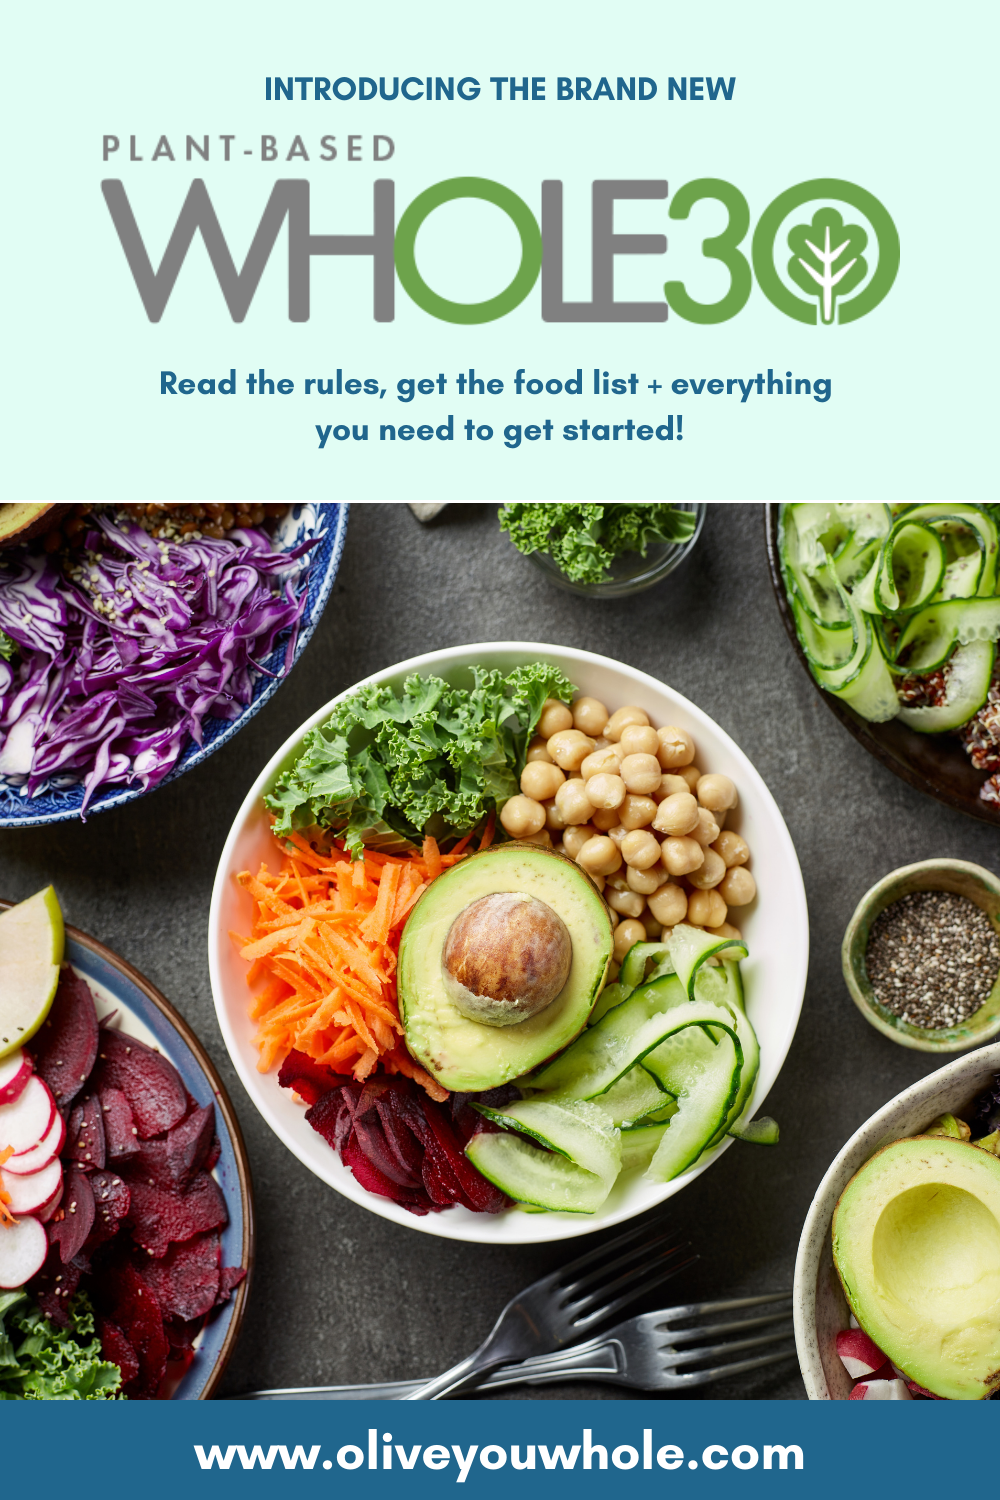 PlantBased Whole30 Rules + Food List My Home Chef Recipes